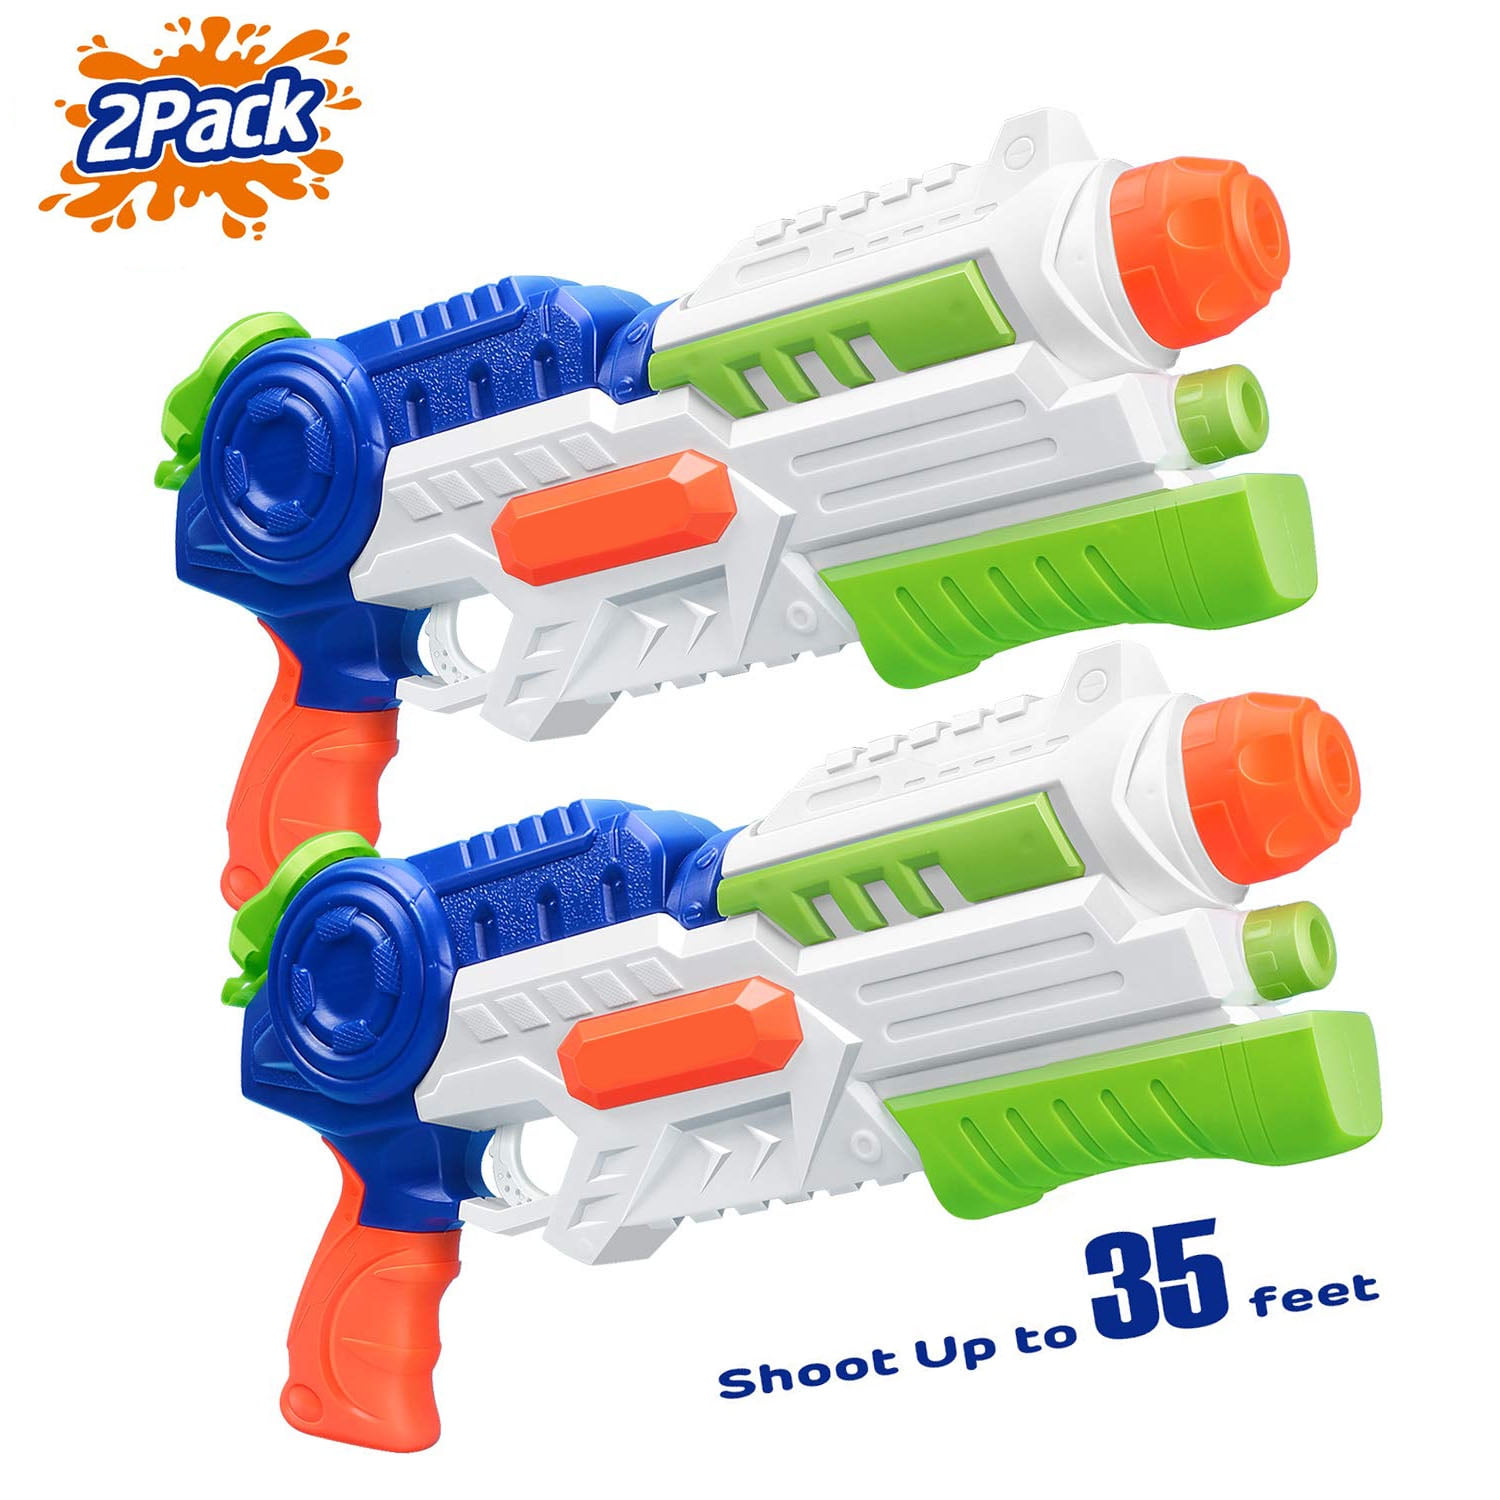 2 Pack Super Water Blaster Soaker 400CC Squirt Guns for Swimming Pool Boys and Girls Water Guns for Kids Cool Birthday Party Favors for Adults Beach and Outdoor Summer Fun